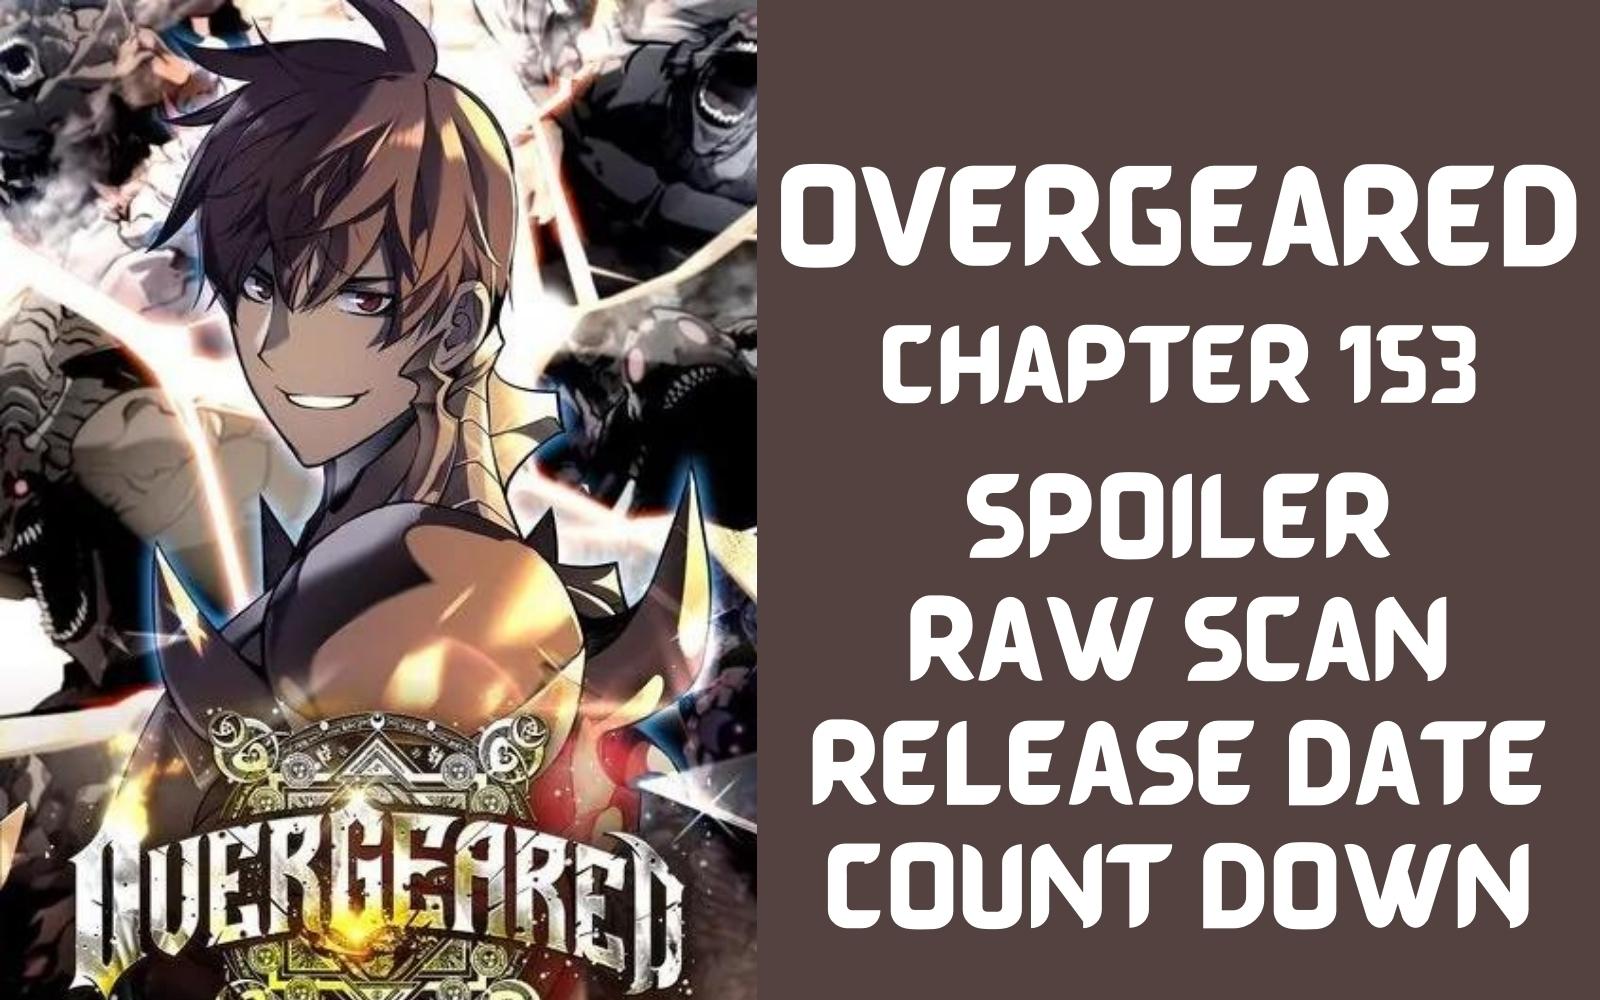 Overgeared Chapter 153 Spoiler, Raw Scan, Release Date, Countdown, Color Page, Release Date